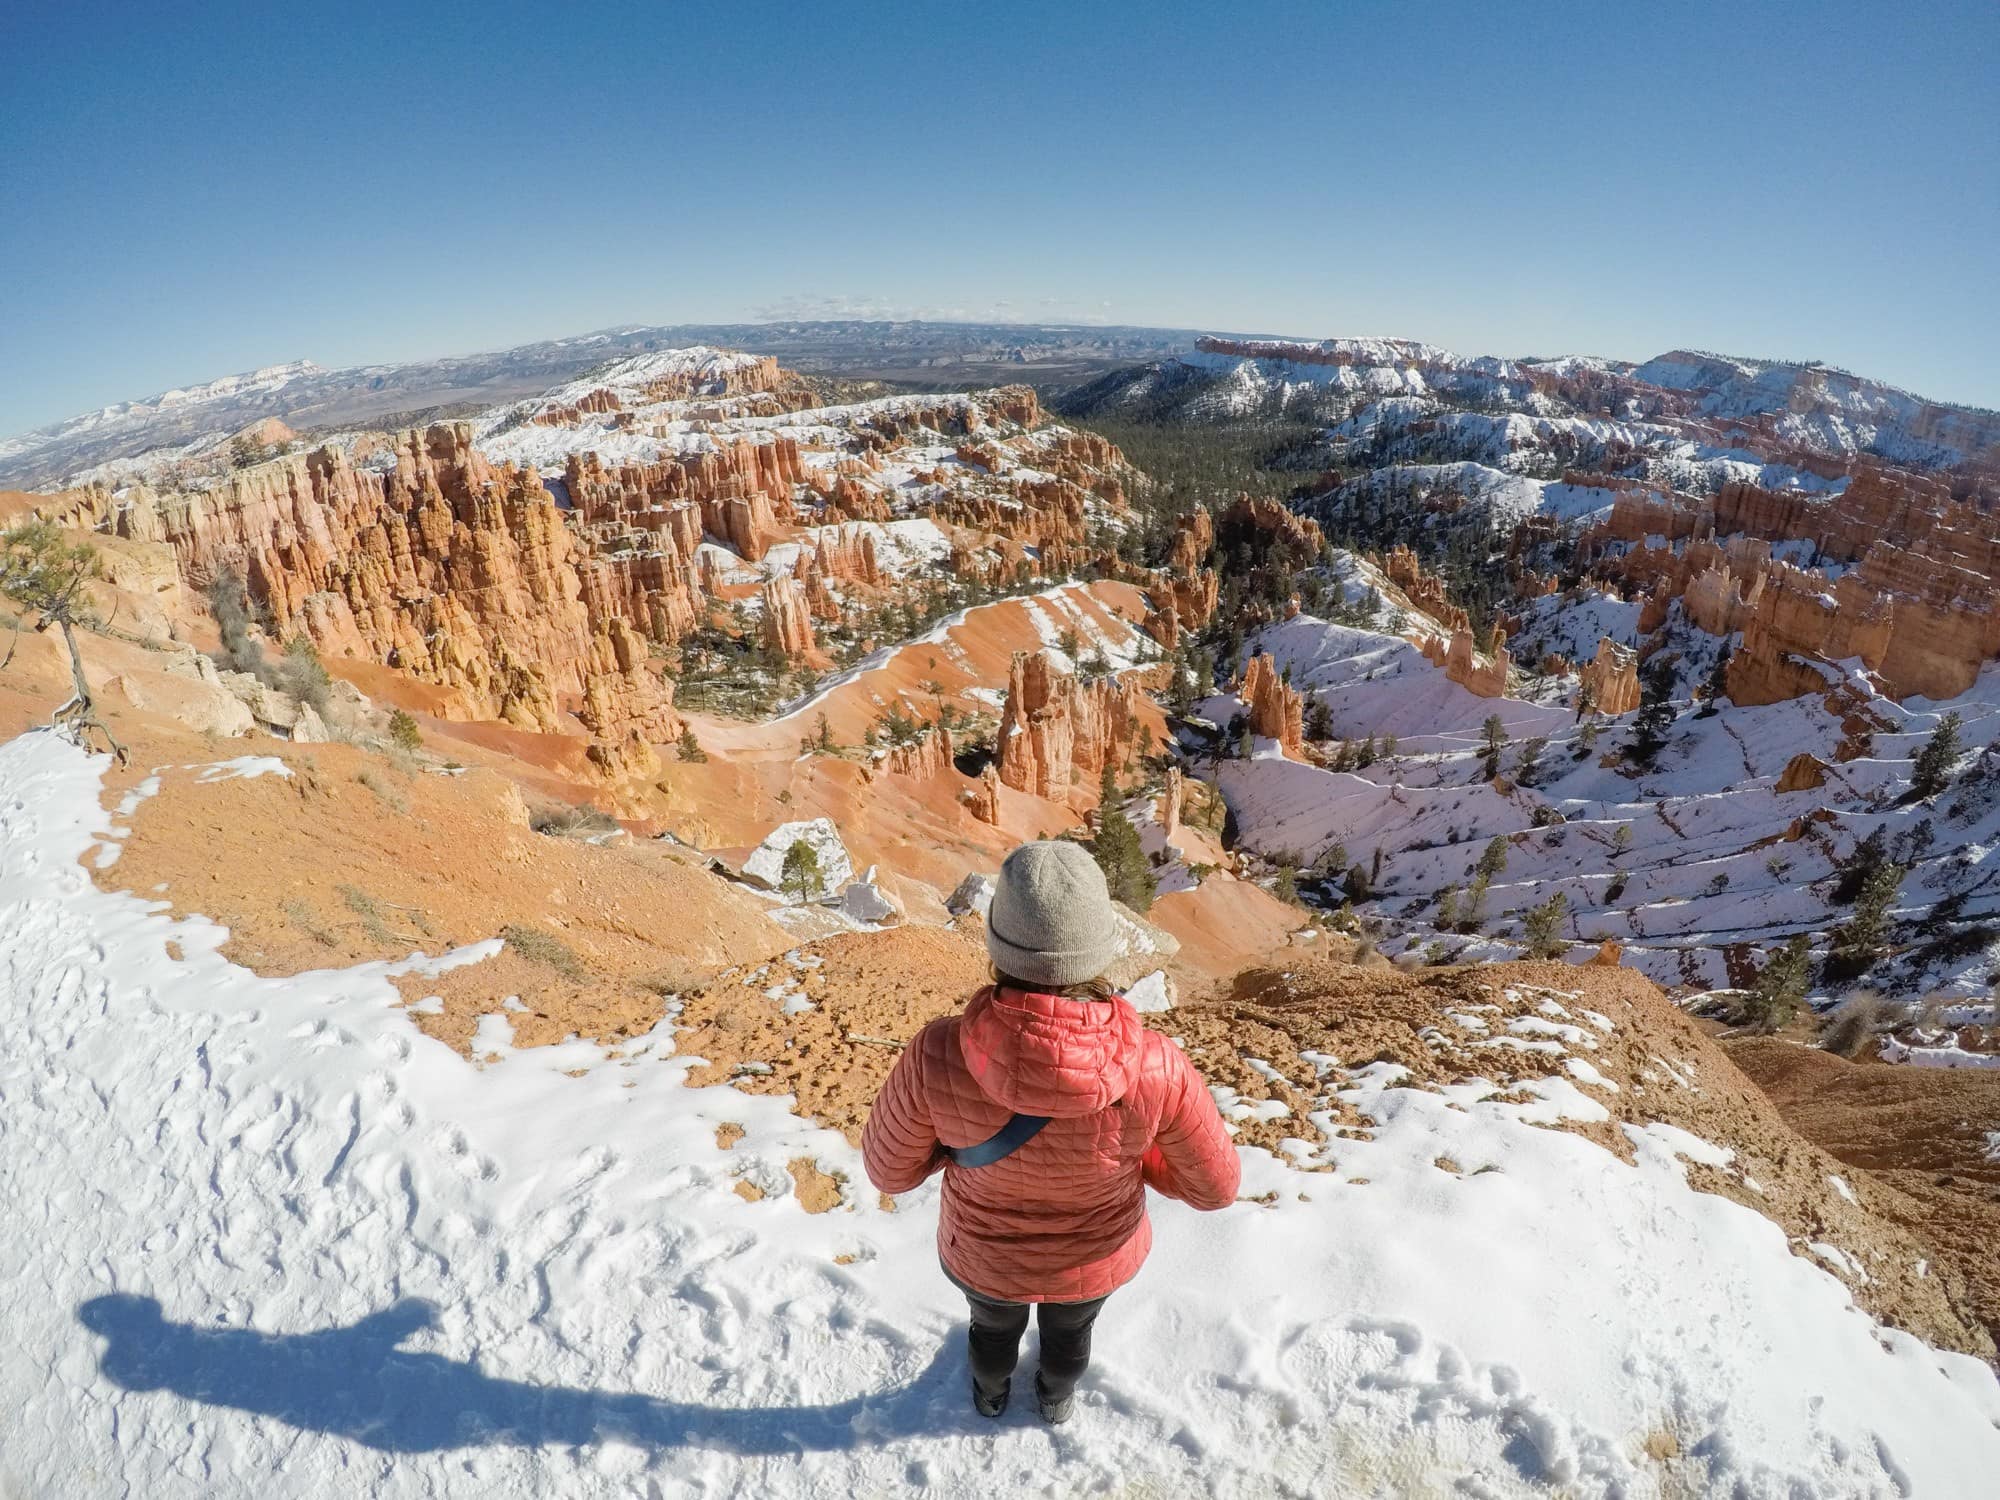 Bryce Canyon in winter // Explore Utah National Parks in this 9-day road trip itinerary with the best hikes, activities & camping in Zion, Bryce, Capitol Reef, Arches & Canyonlands.